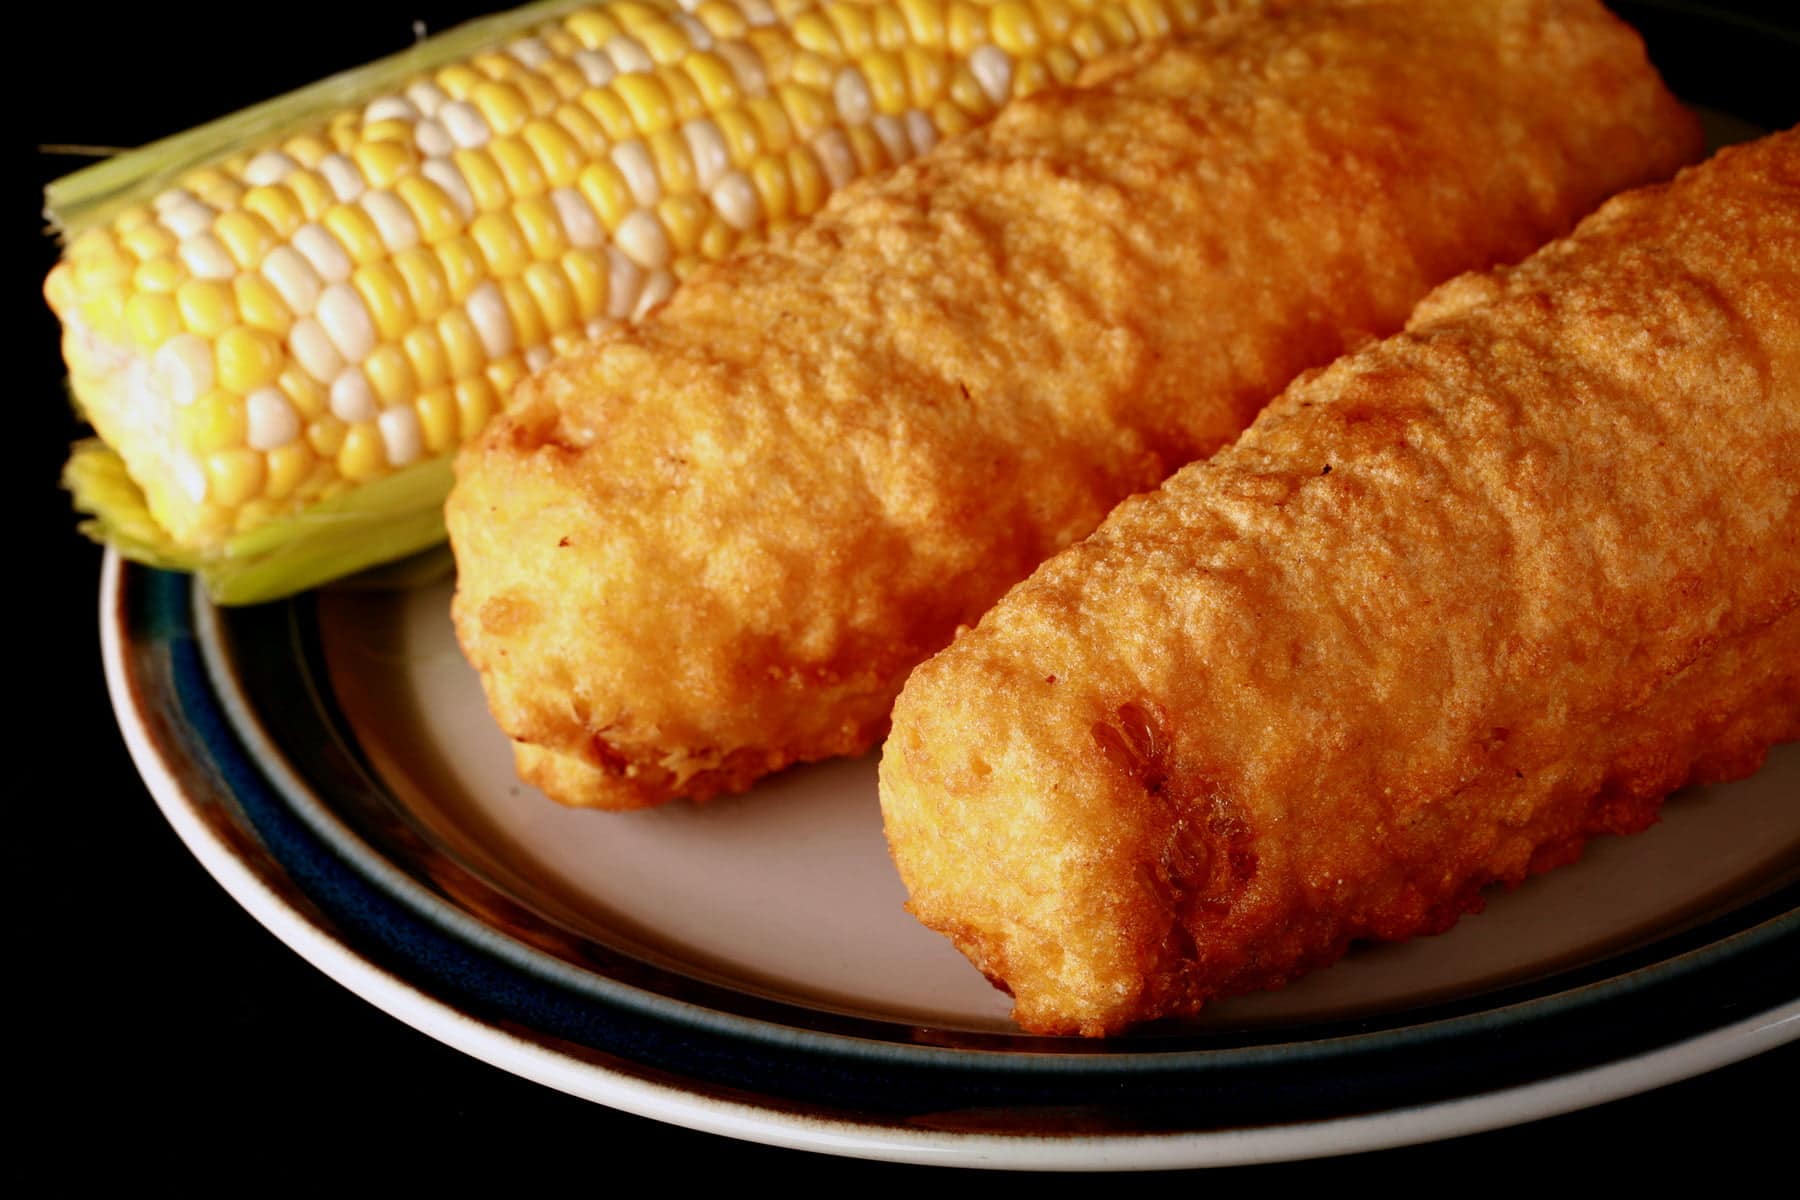 3 cobs of corn - 1 fresh, 2 battered and deep fried - are lined up on a plate.